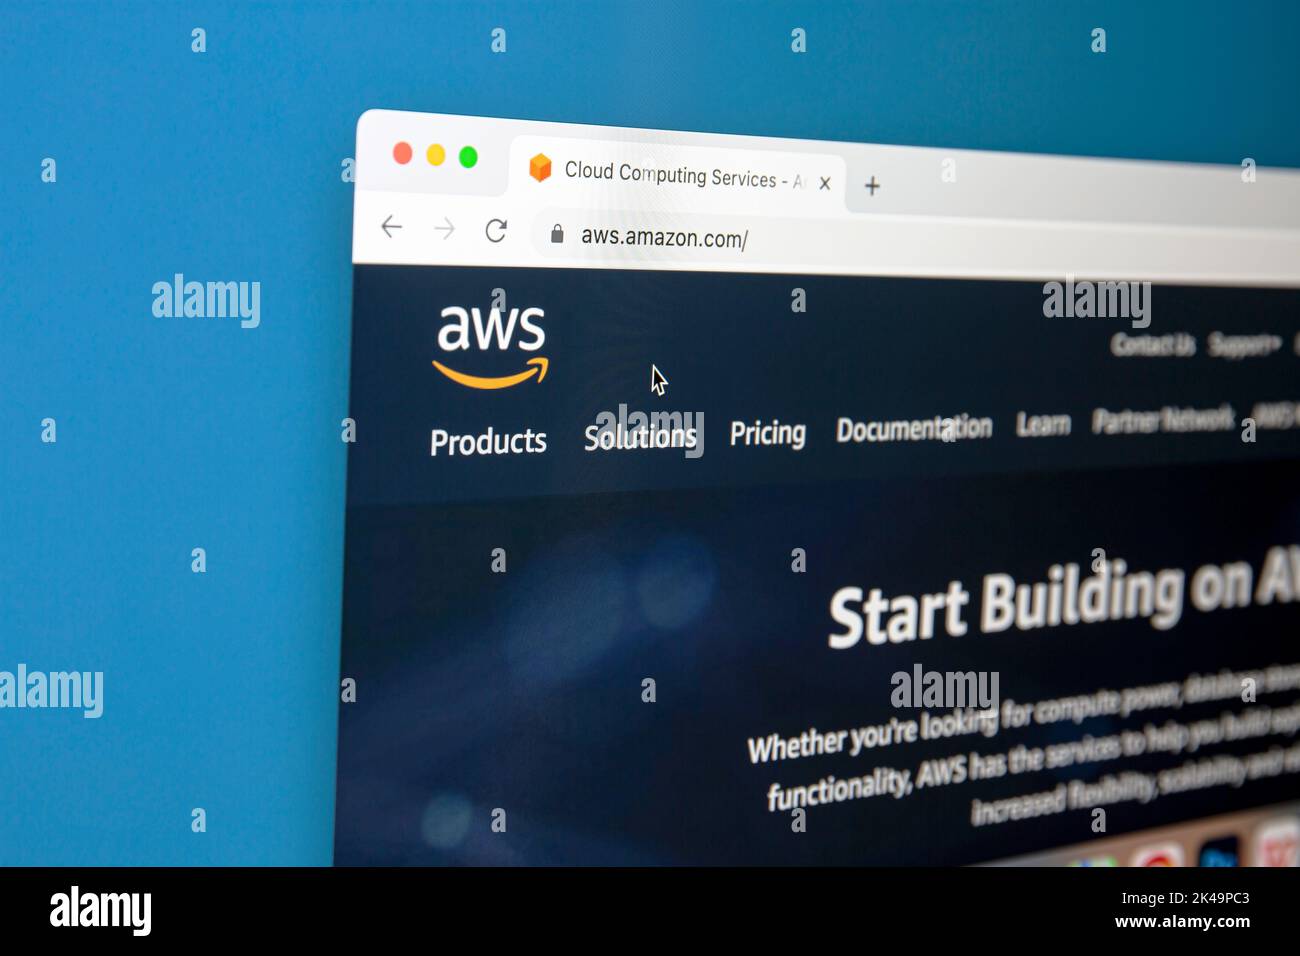 Ostersund, Sweden - July 11, 2022: AWS website on a computer screen. Amazon Web Services is a subsidiary of Amazon that provides on-demand cloud compu Stock Photo